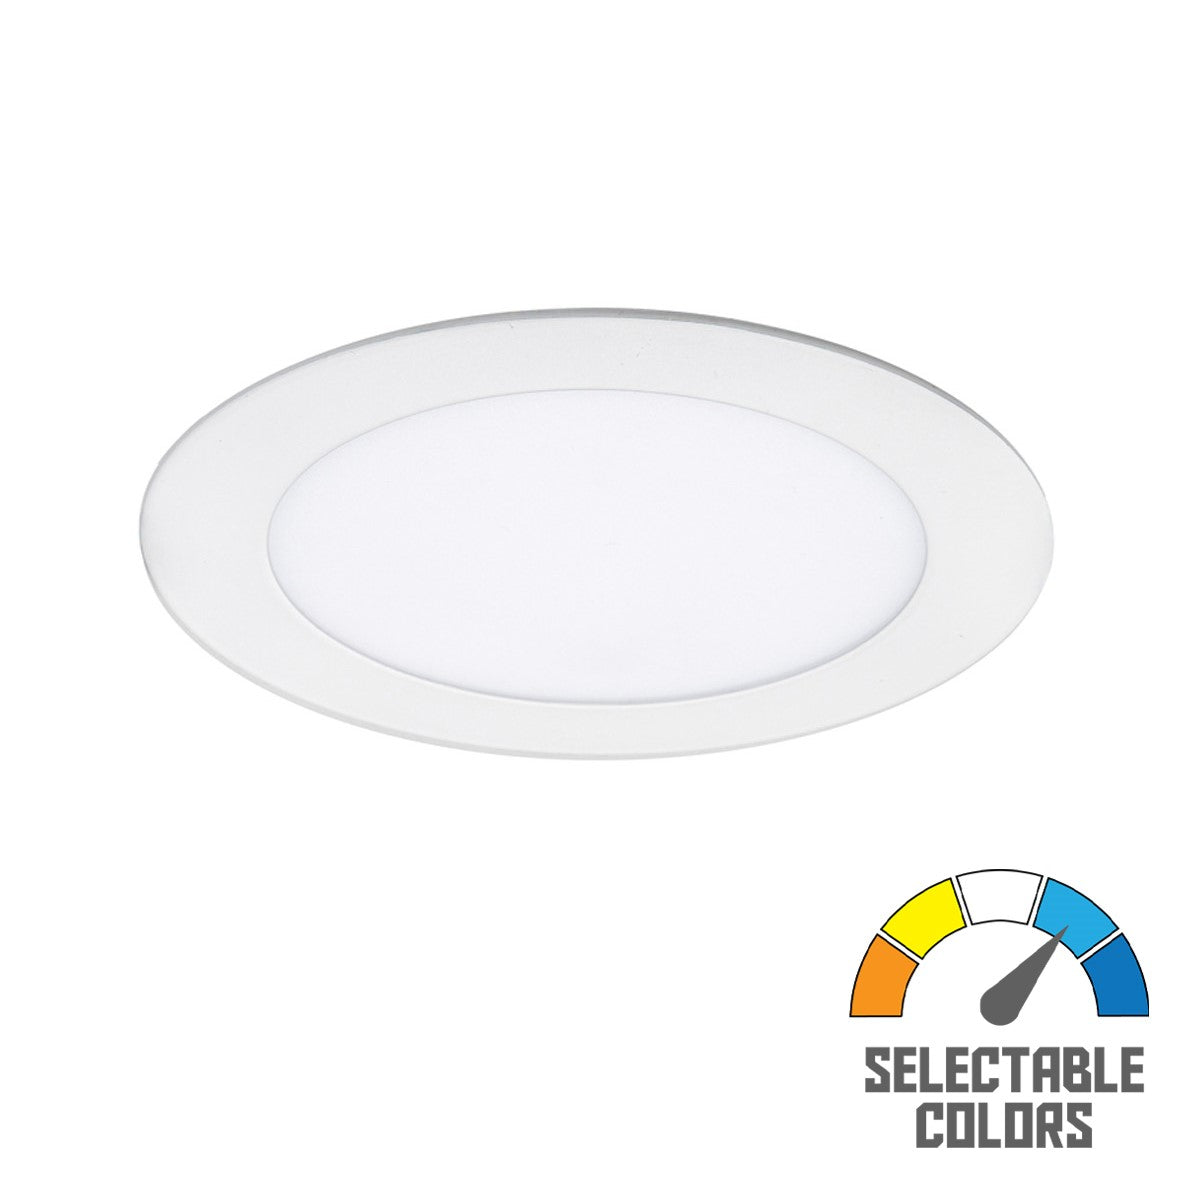 6 In. Lotos LED Canless LED Recessed Light, 12 Watt, 1200 Lumens, Selectable CCT, 2700K to 5000K, 120/277V